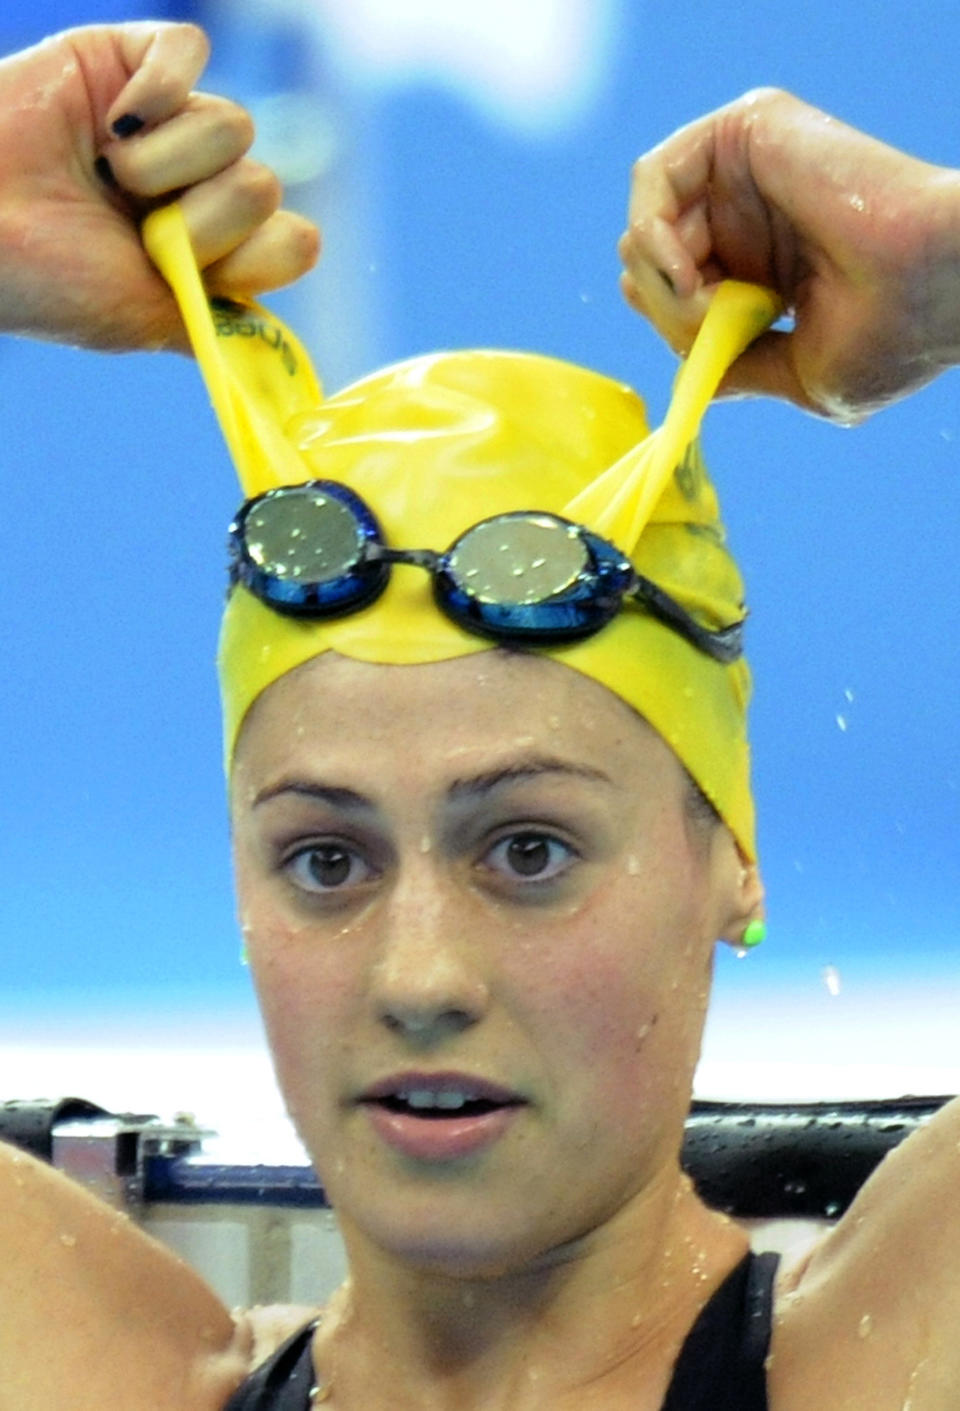 Australia's Stephanie Rice takes of her cap after her victory in the women's 400m individual medley swimming final at the National Aquatics Center in the 2008 Beijing Olympic Games on August 10, 2008 in Beijing. (FRANCOIS XAVIER MARIT/AFP/Getty Images)